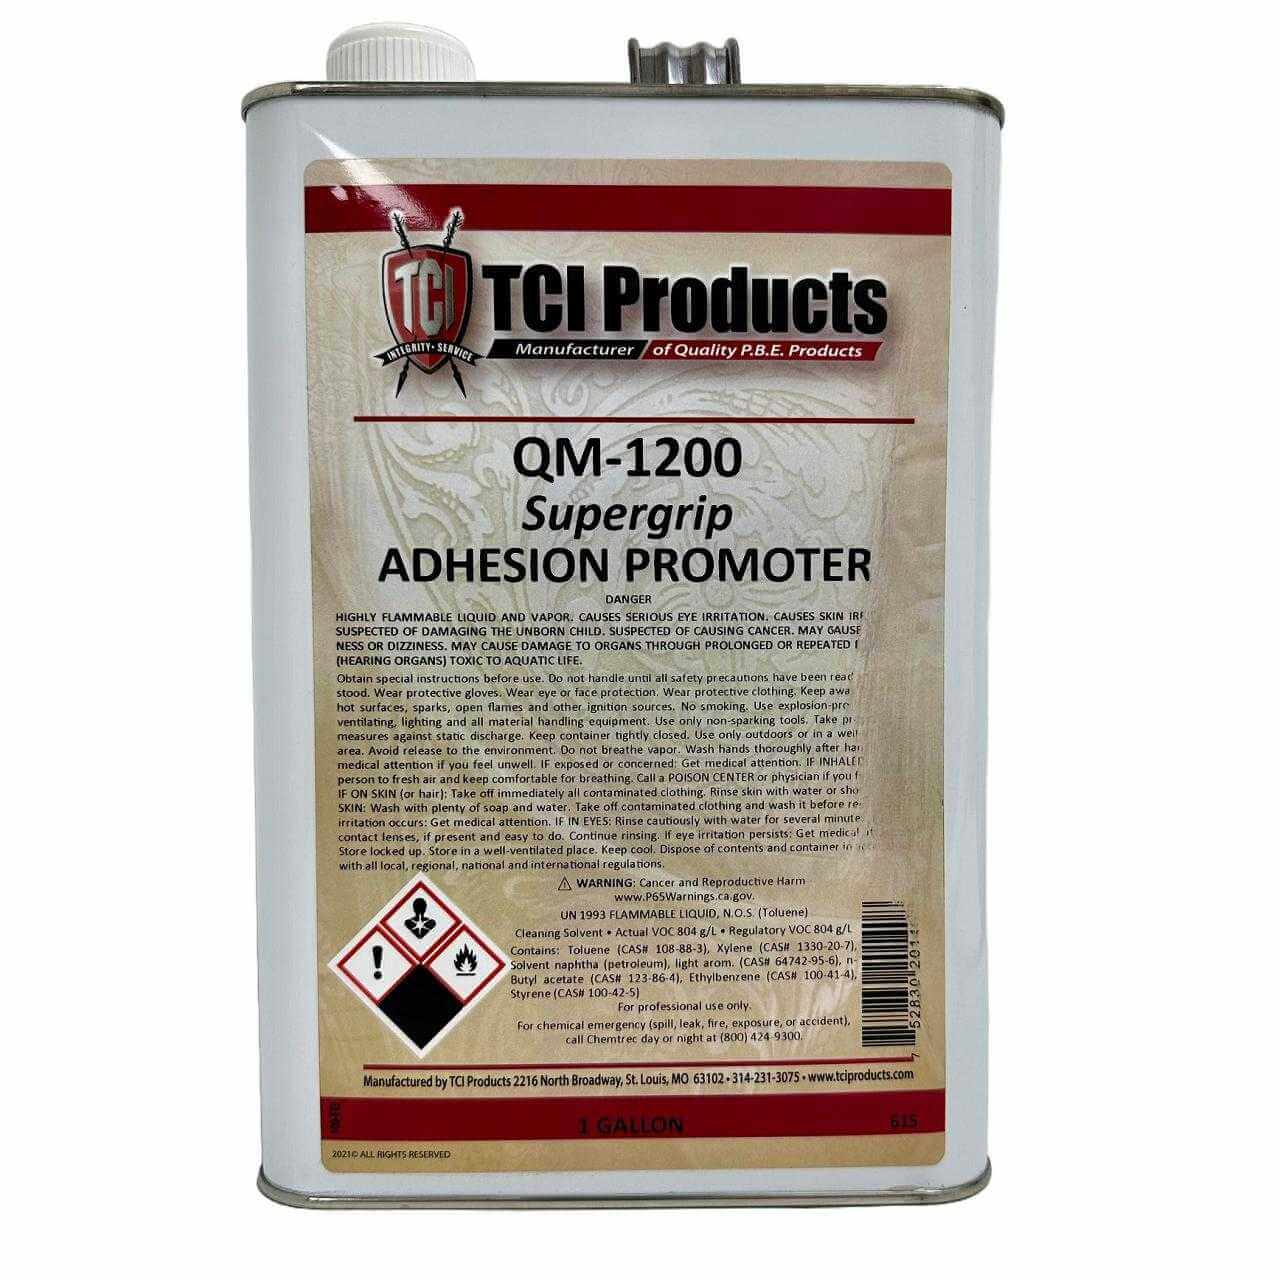 Qm1200 Adhesion Promoter Bull Dog Alternative Questions & Answers